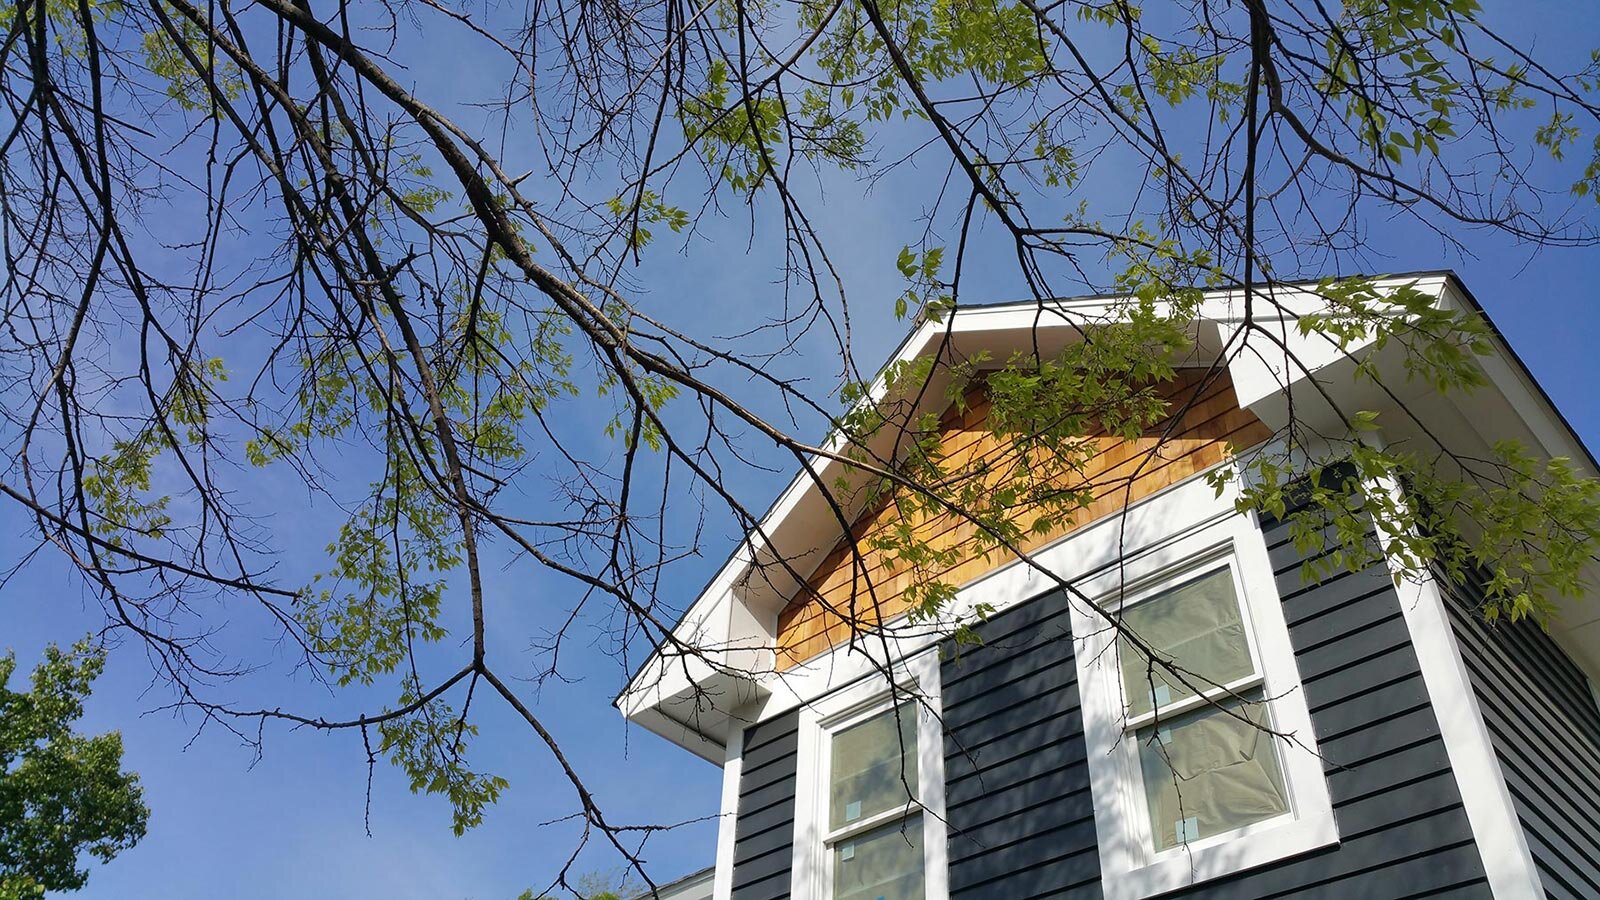 View of roofline through tree branches